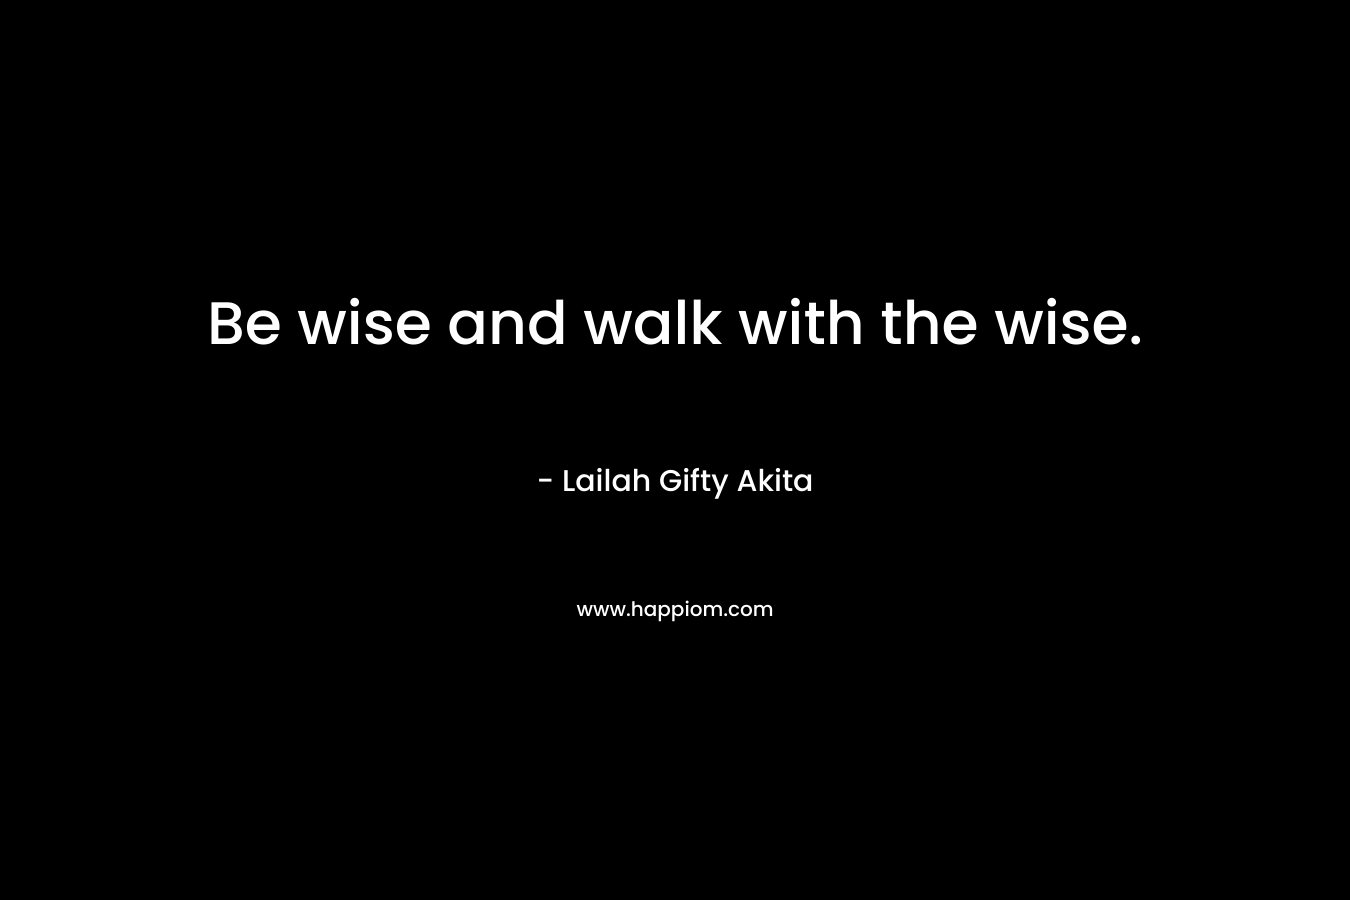 Be wise and walk with the wise. – Lailah Gifty Akita